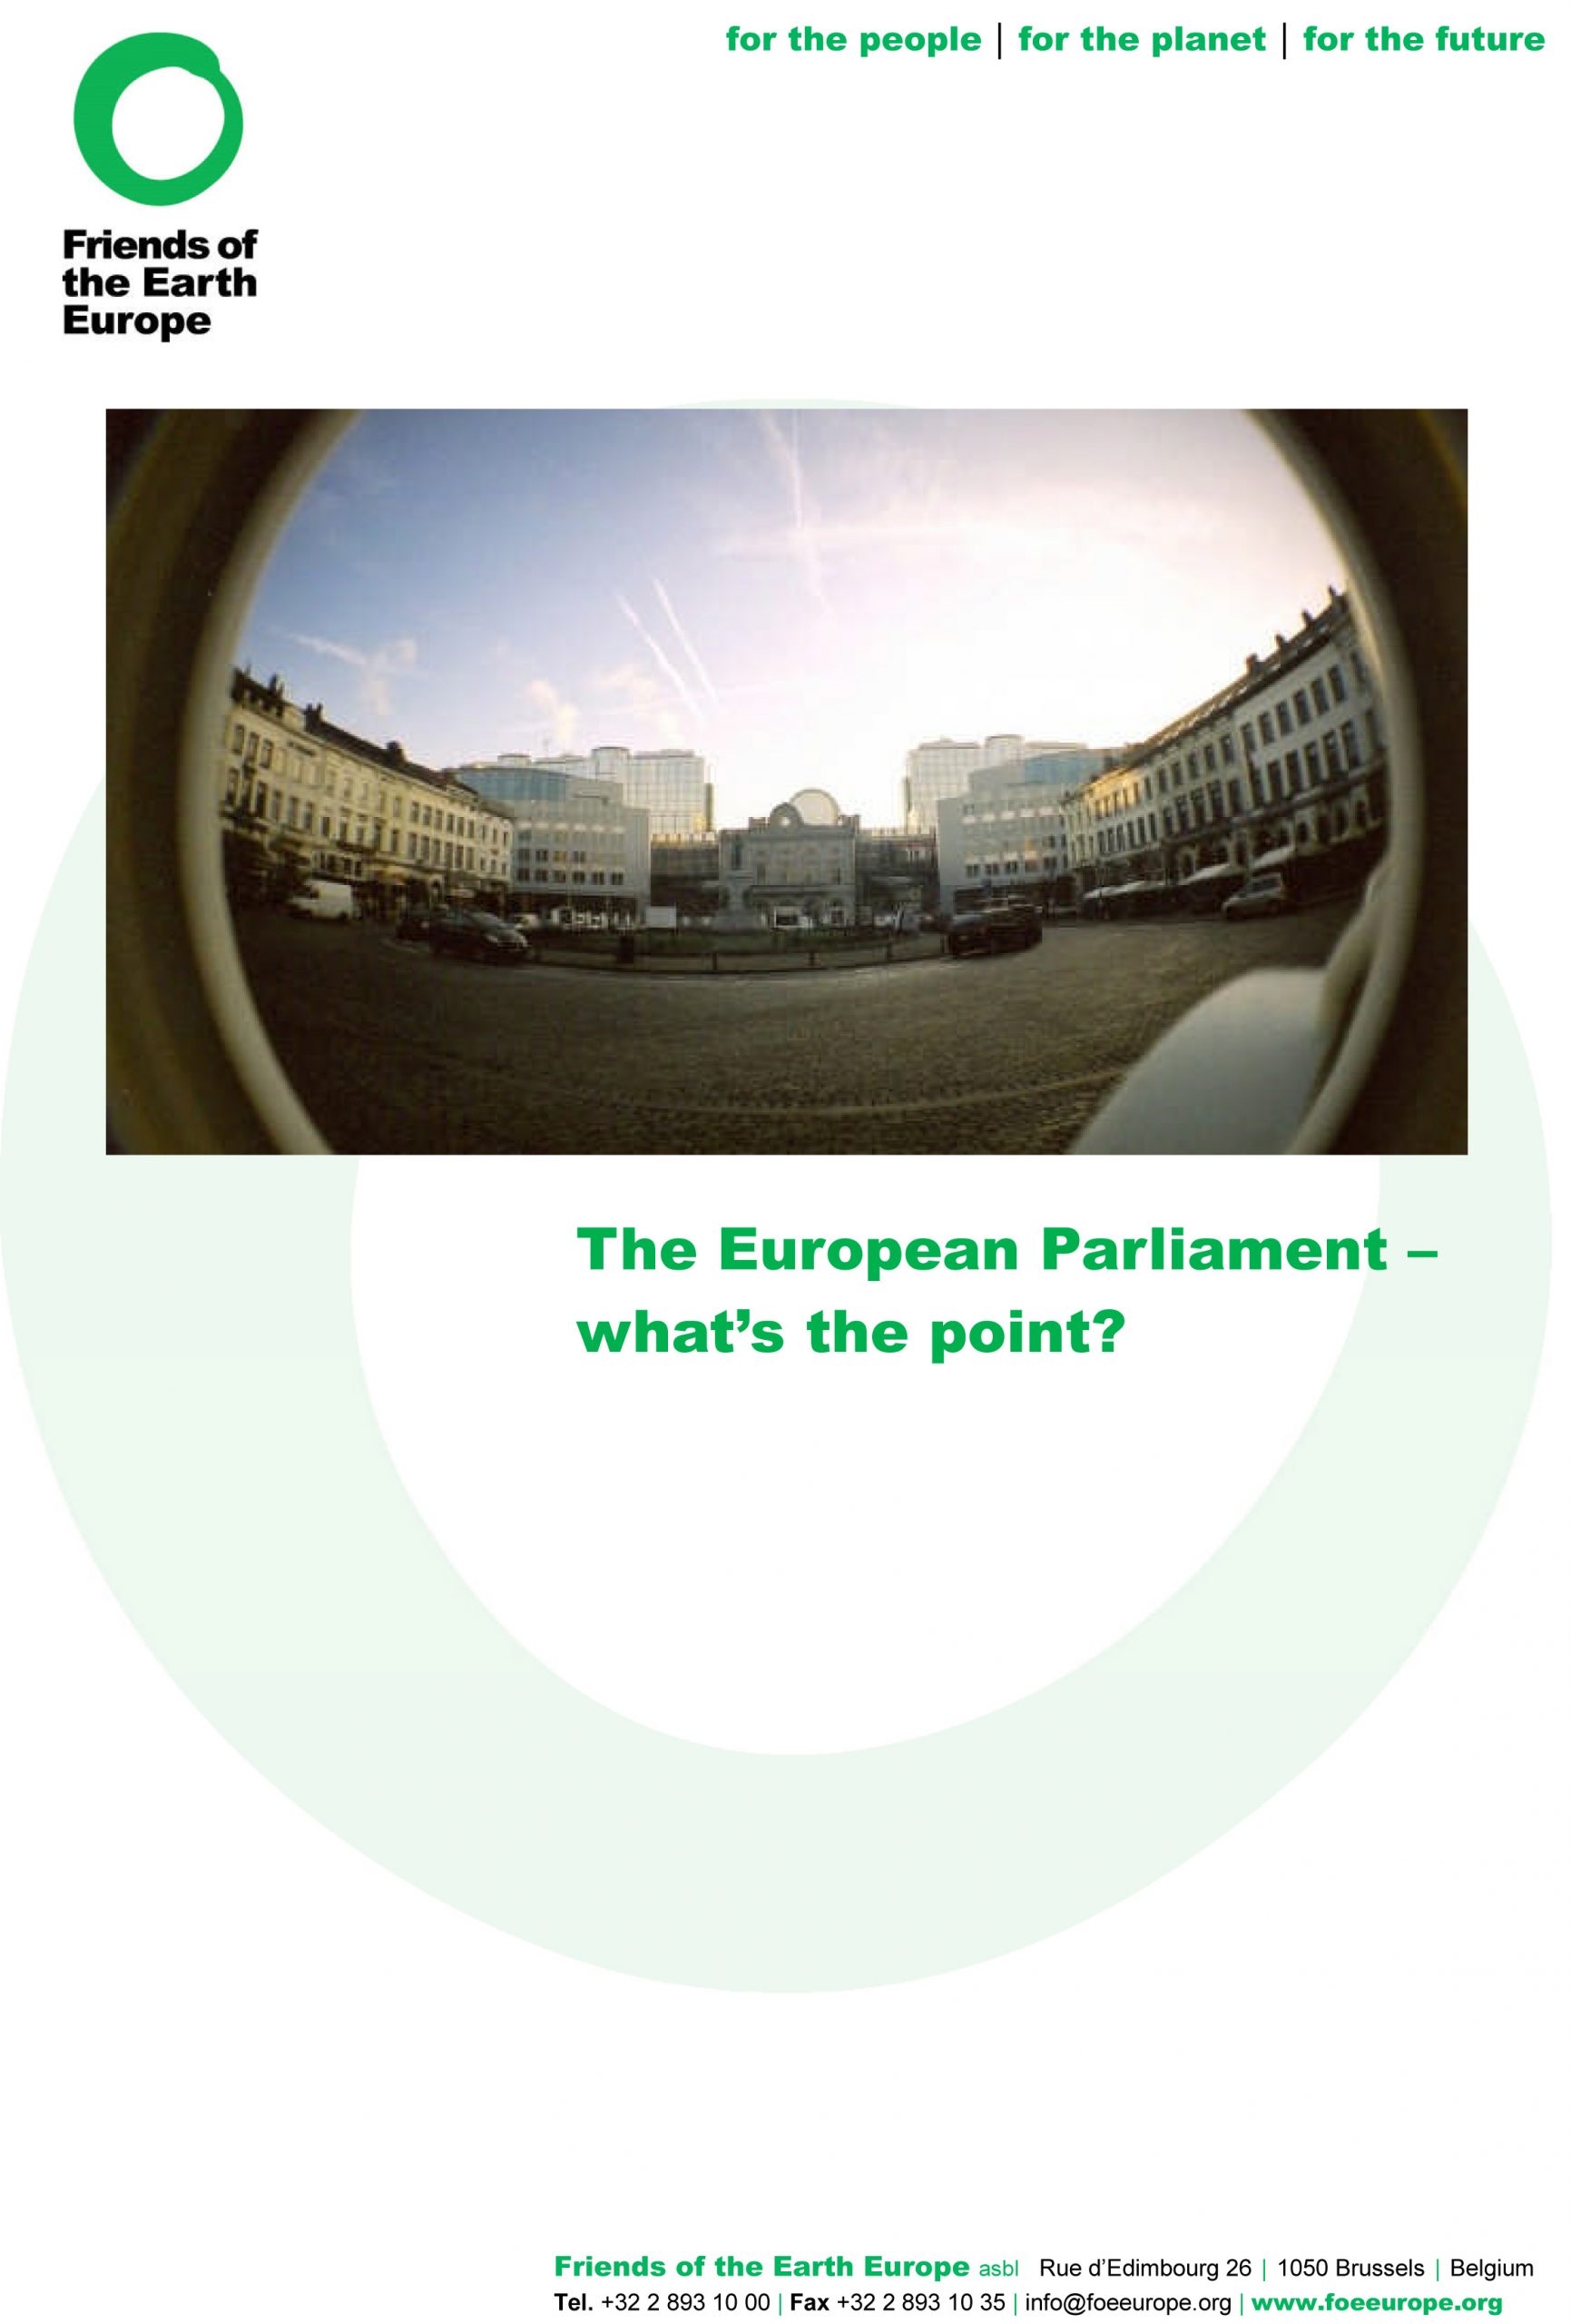 ep-whats-the-point-brief-august2013-thumb